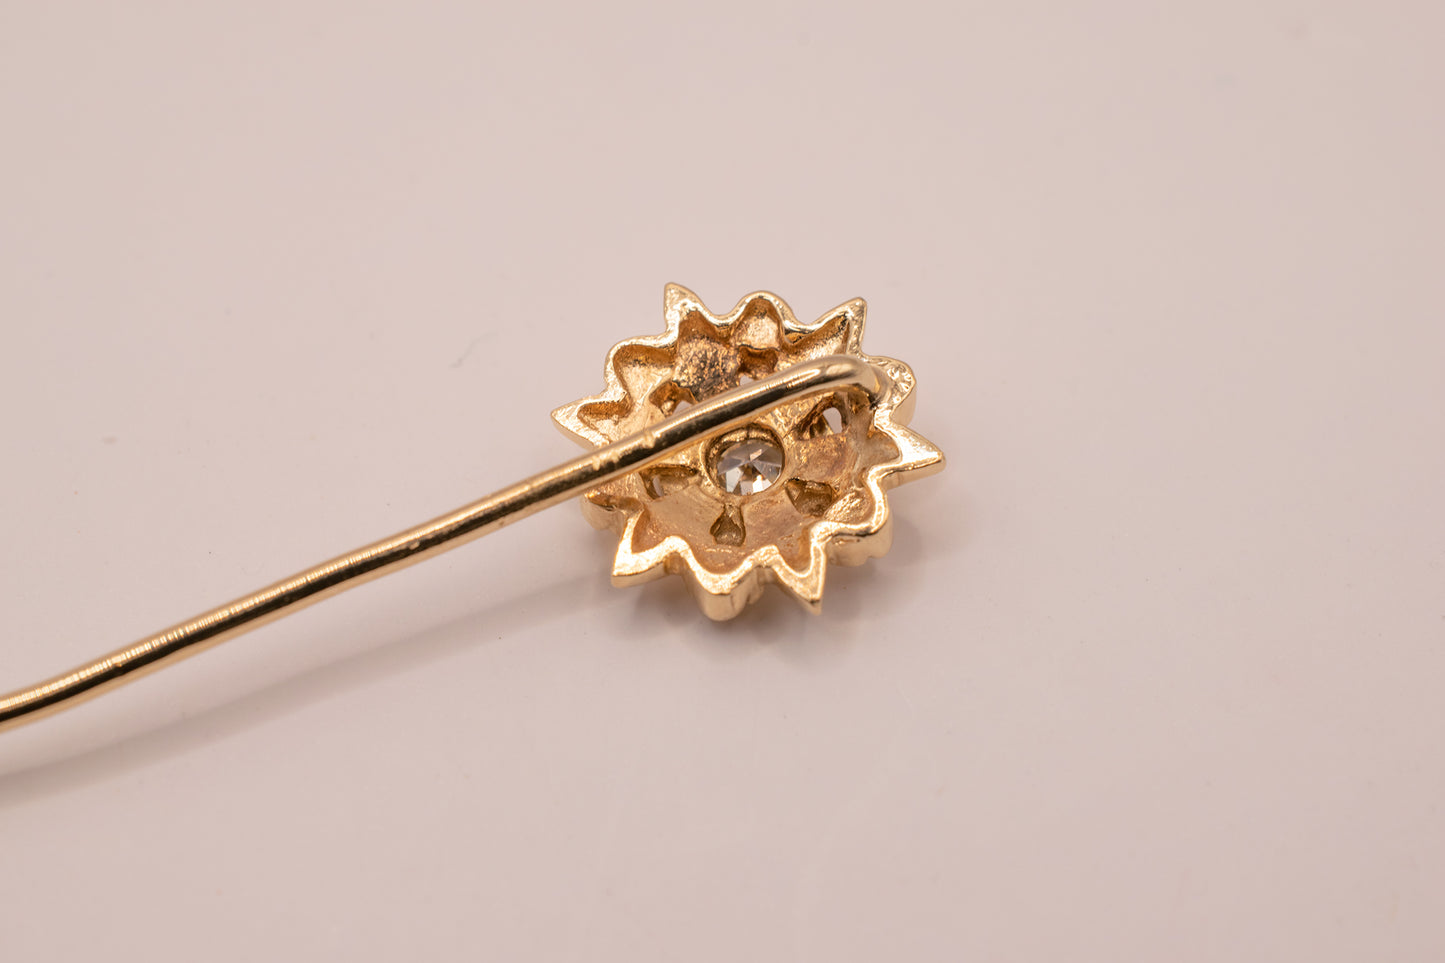 Vintage 14k Yellow Gold Unisex Floral and Milgrain Detail Diamond Stick Pin 2 1/5 Inches Long